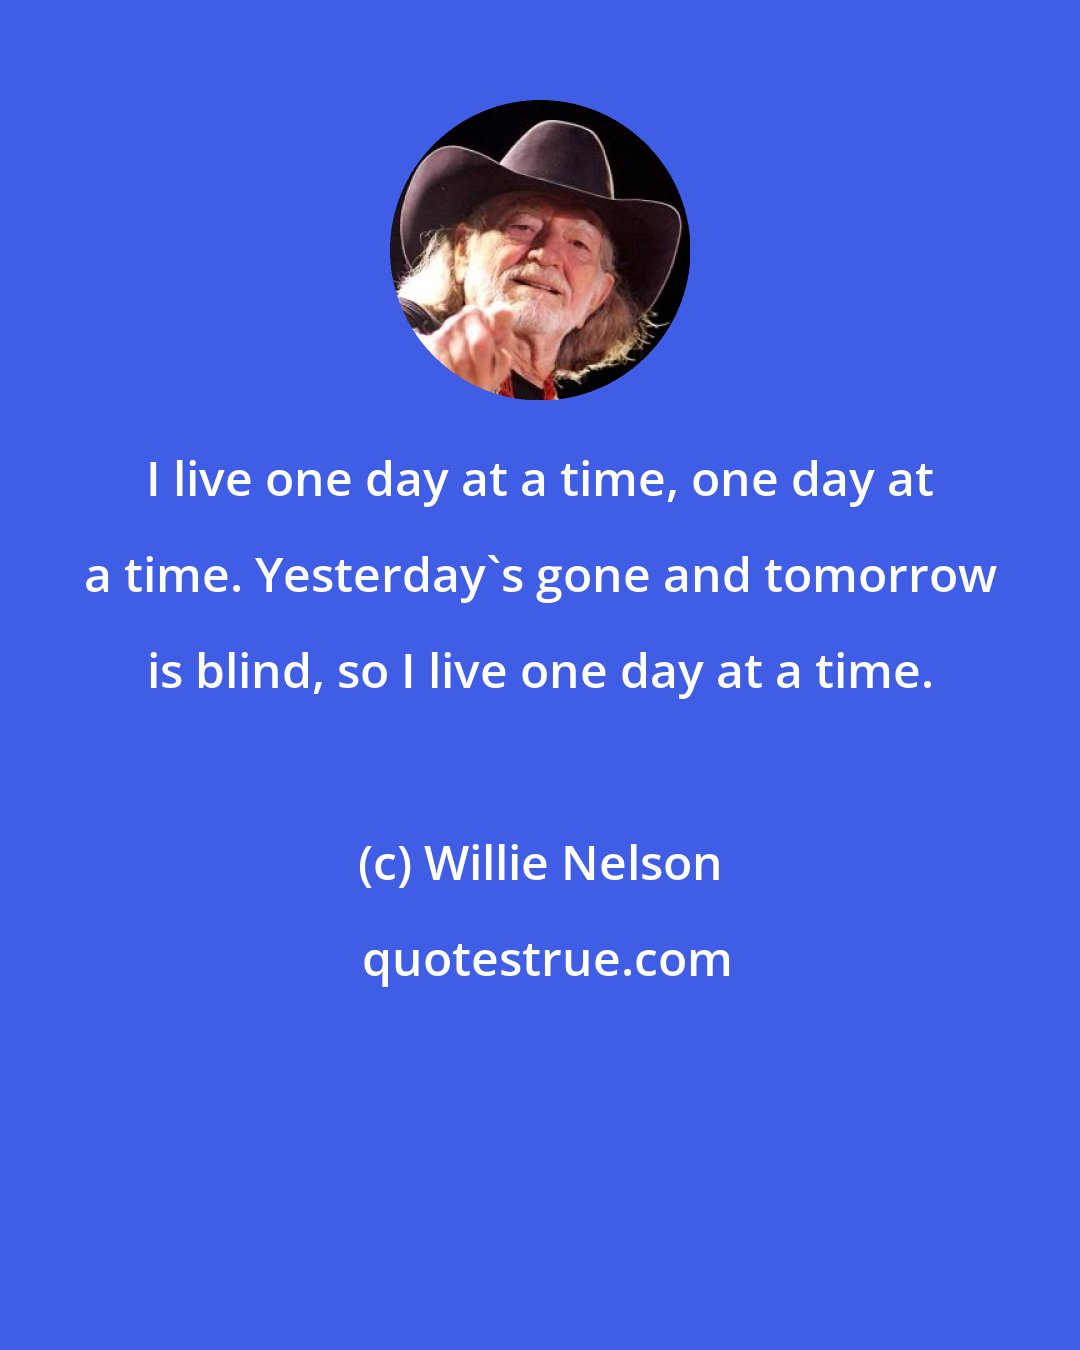 Willie Nelson: I live one day at a time, one day at a time. Yesterday's gone and tomorrow is blind, so I live one day at a time.